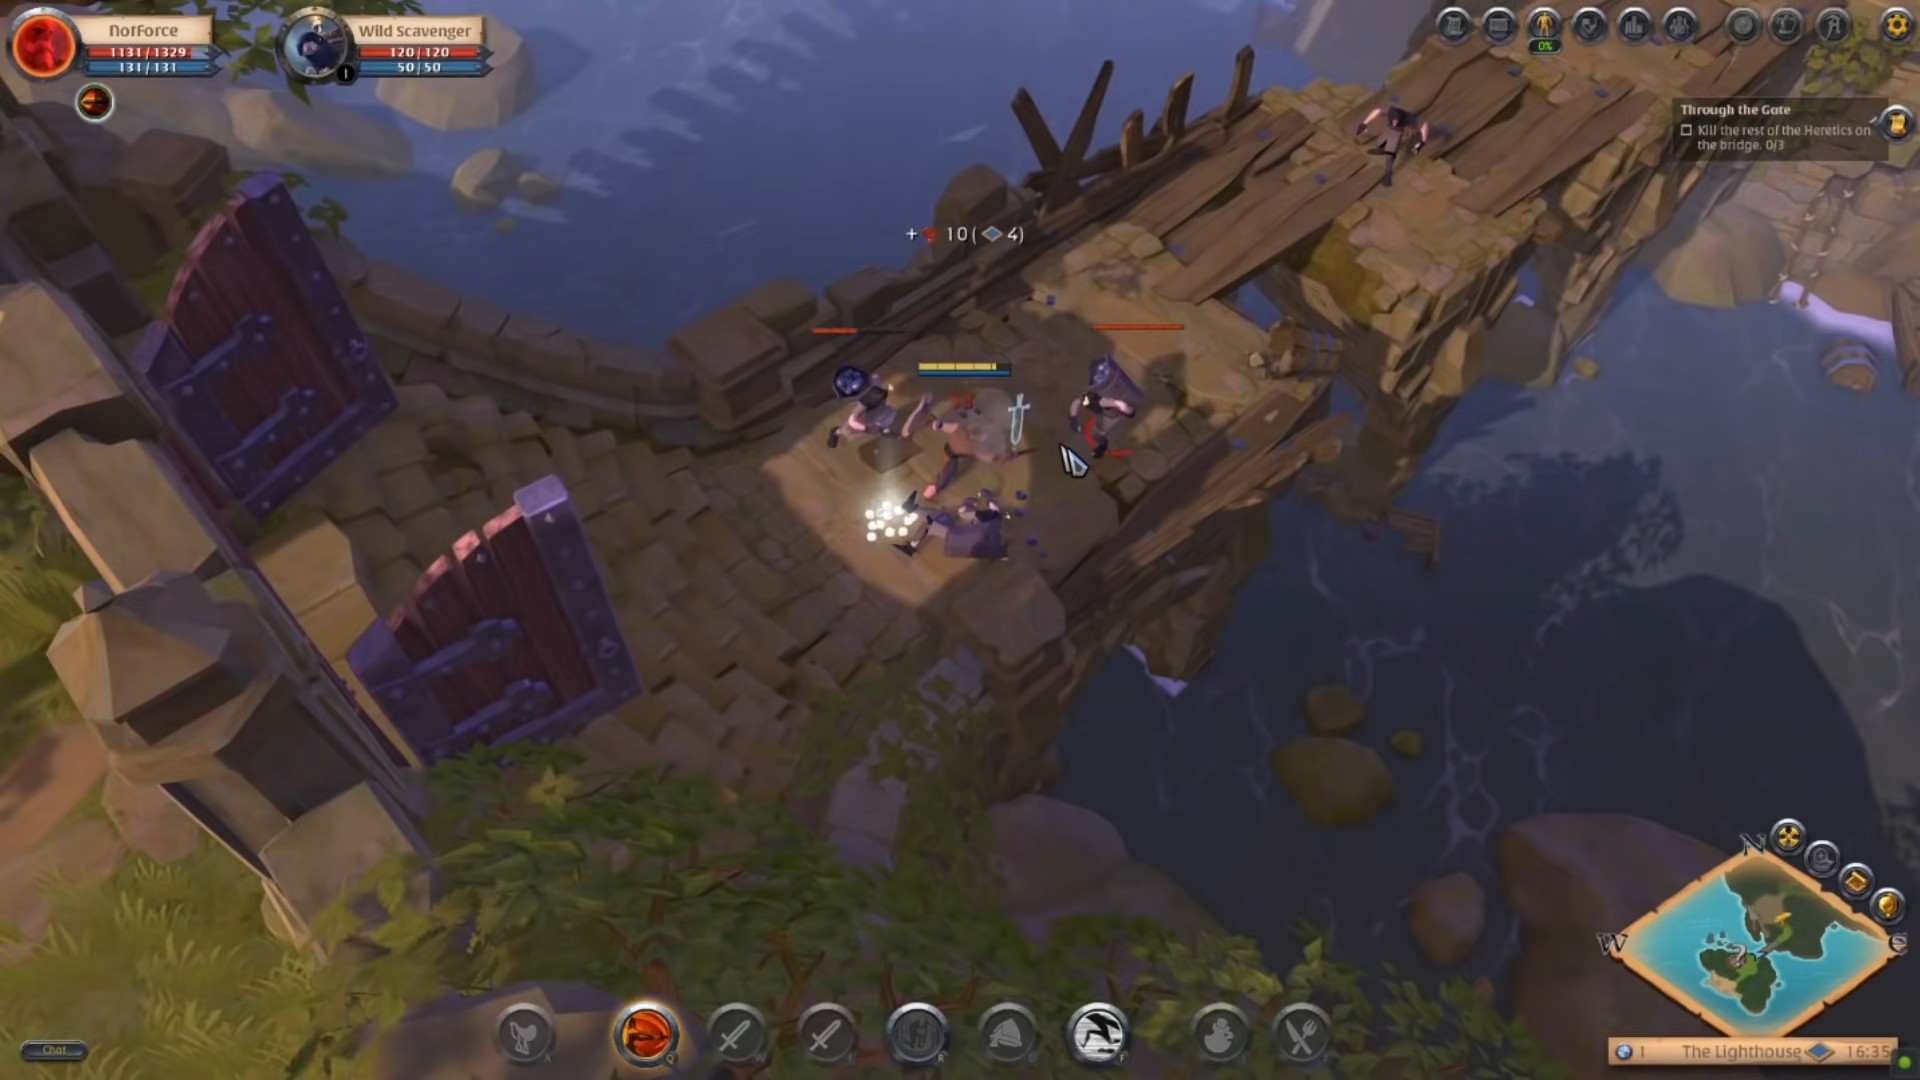 Albion Online is a free to play game available on Android, it's cross  platform aswell. It's not available on the play store you need to download  it off there website but suggest